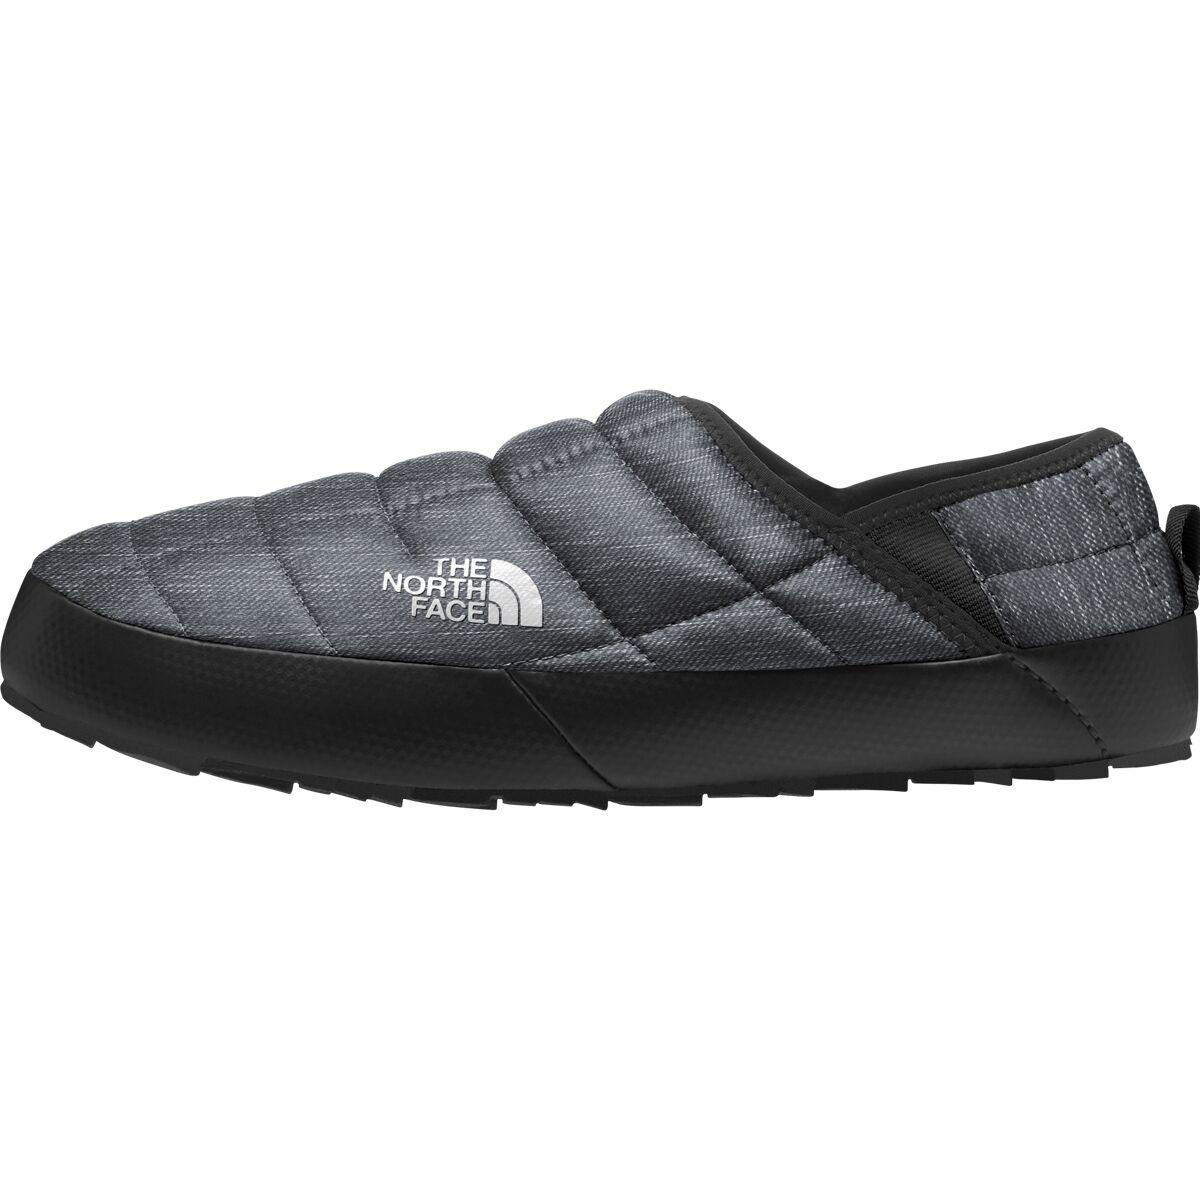 The North Face ThermoBall Traction Mule V Bootie - Men's